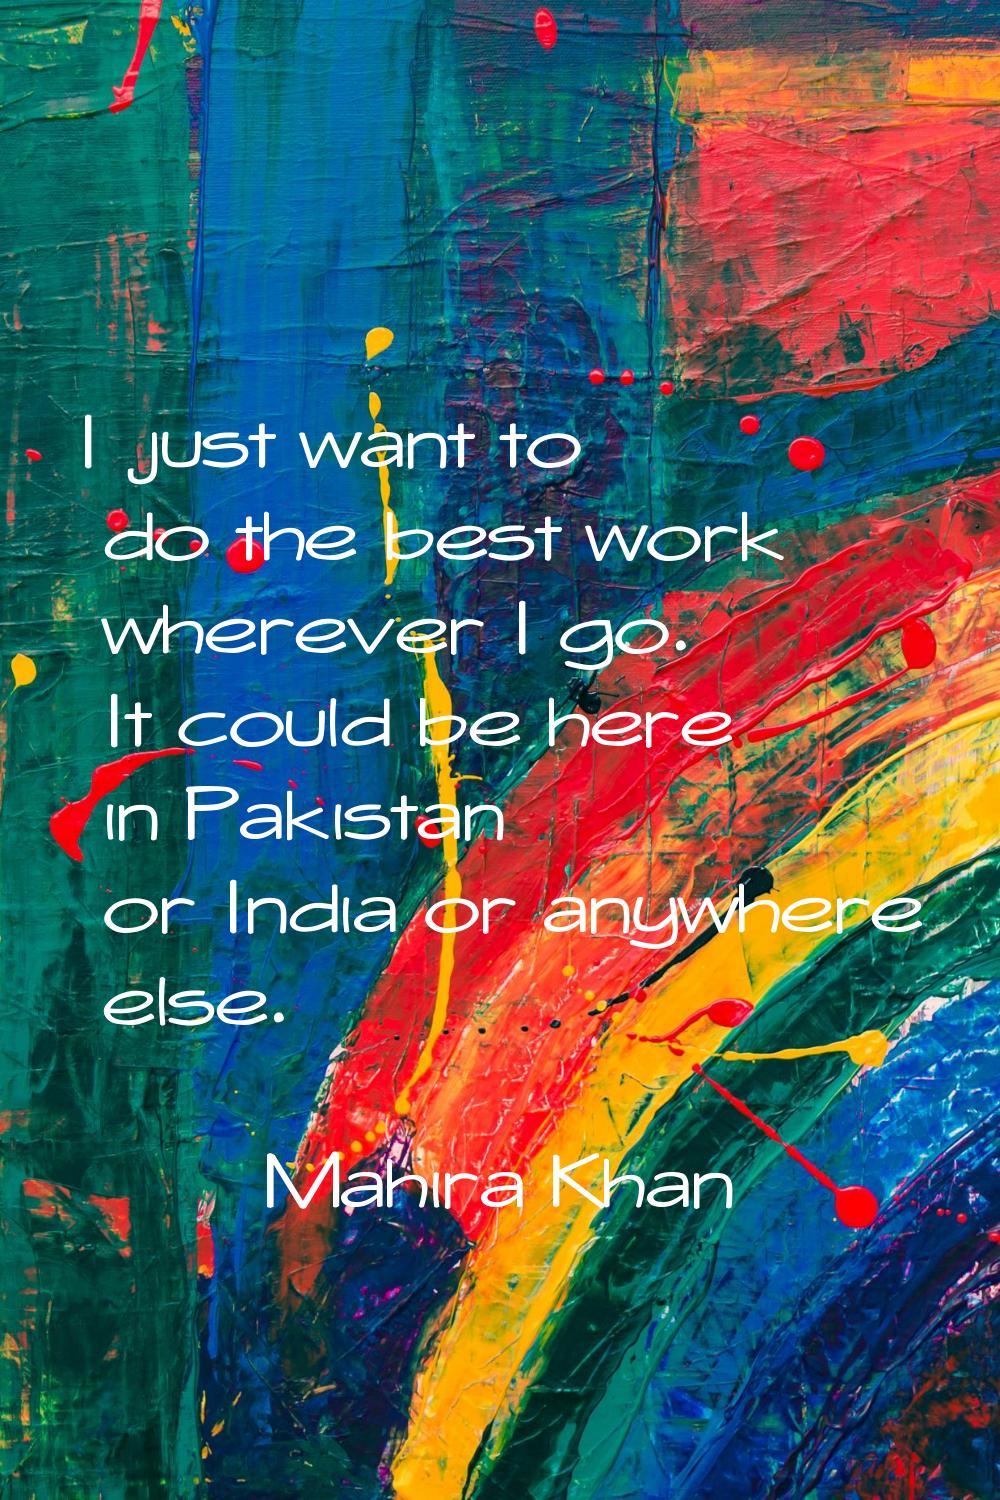 I just want to do the best work wherever I go. It could be here in Pakistan or India or anywhere el